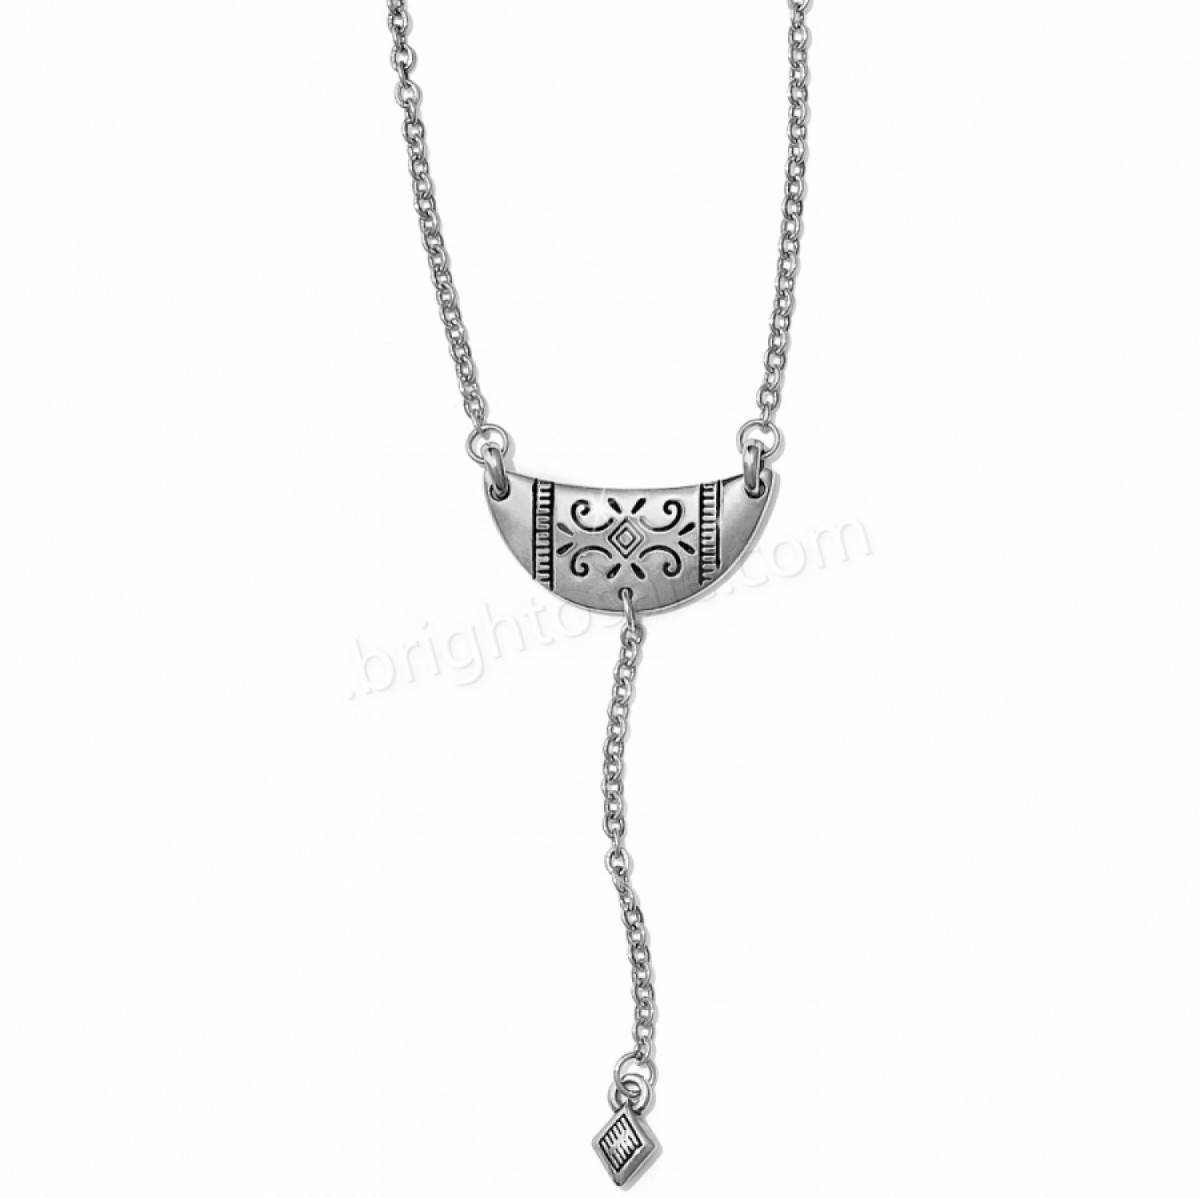 Brighton Collectibles & Online Discount Medaille Medallion Necklace - -0